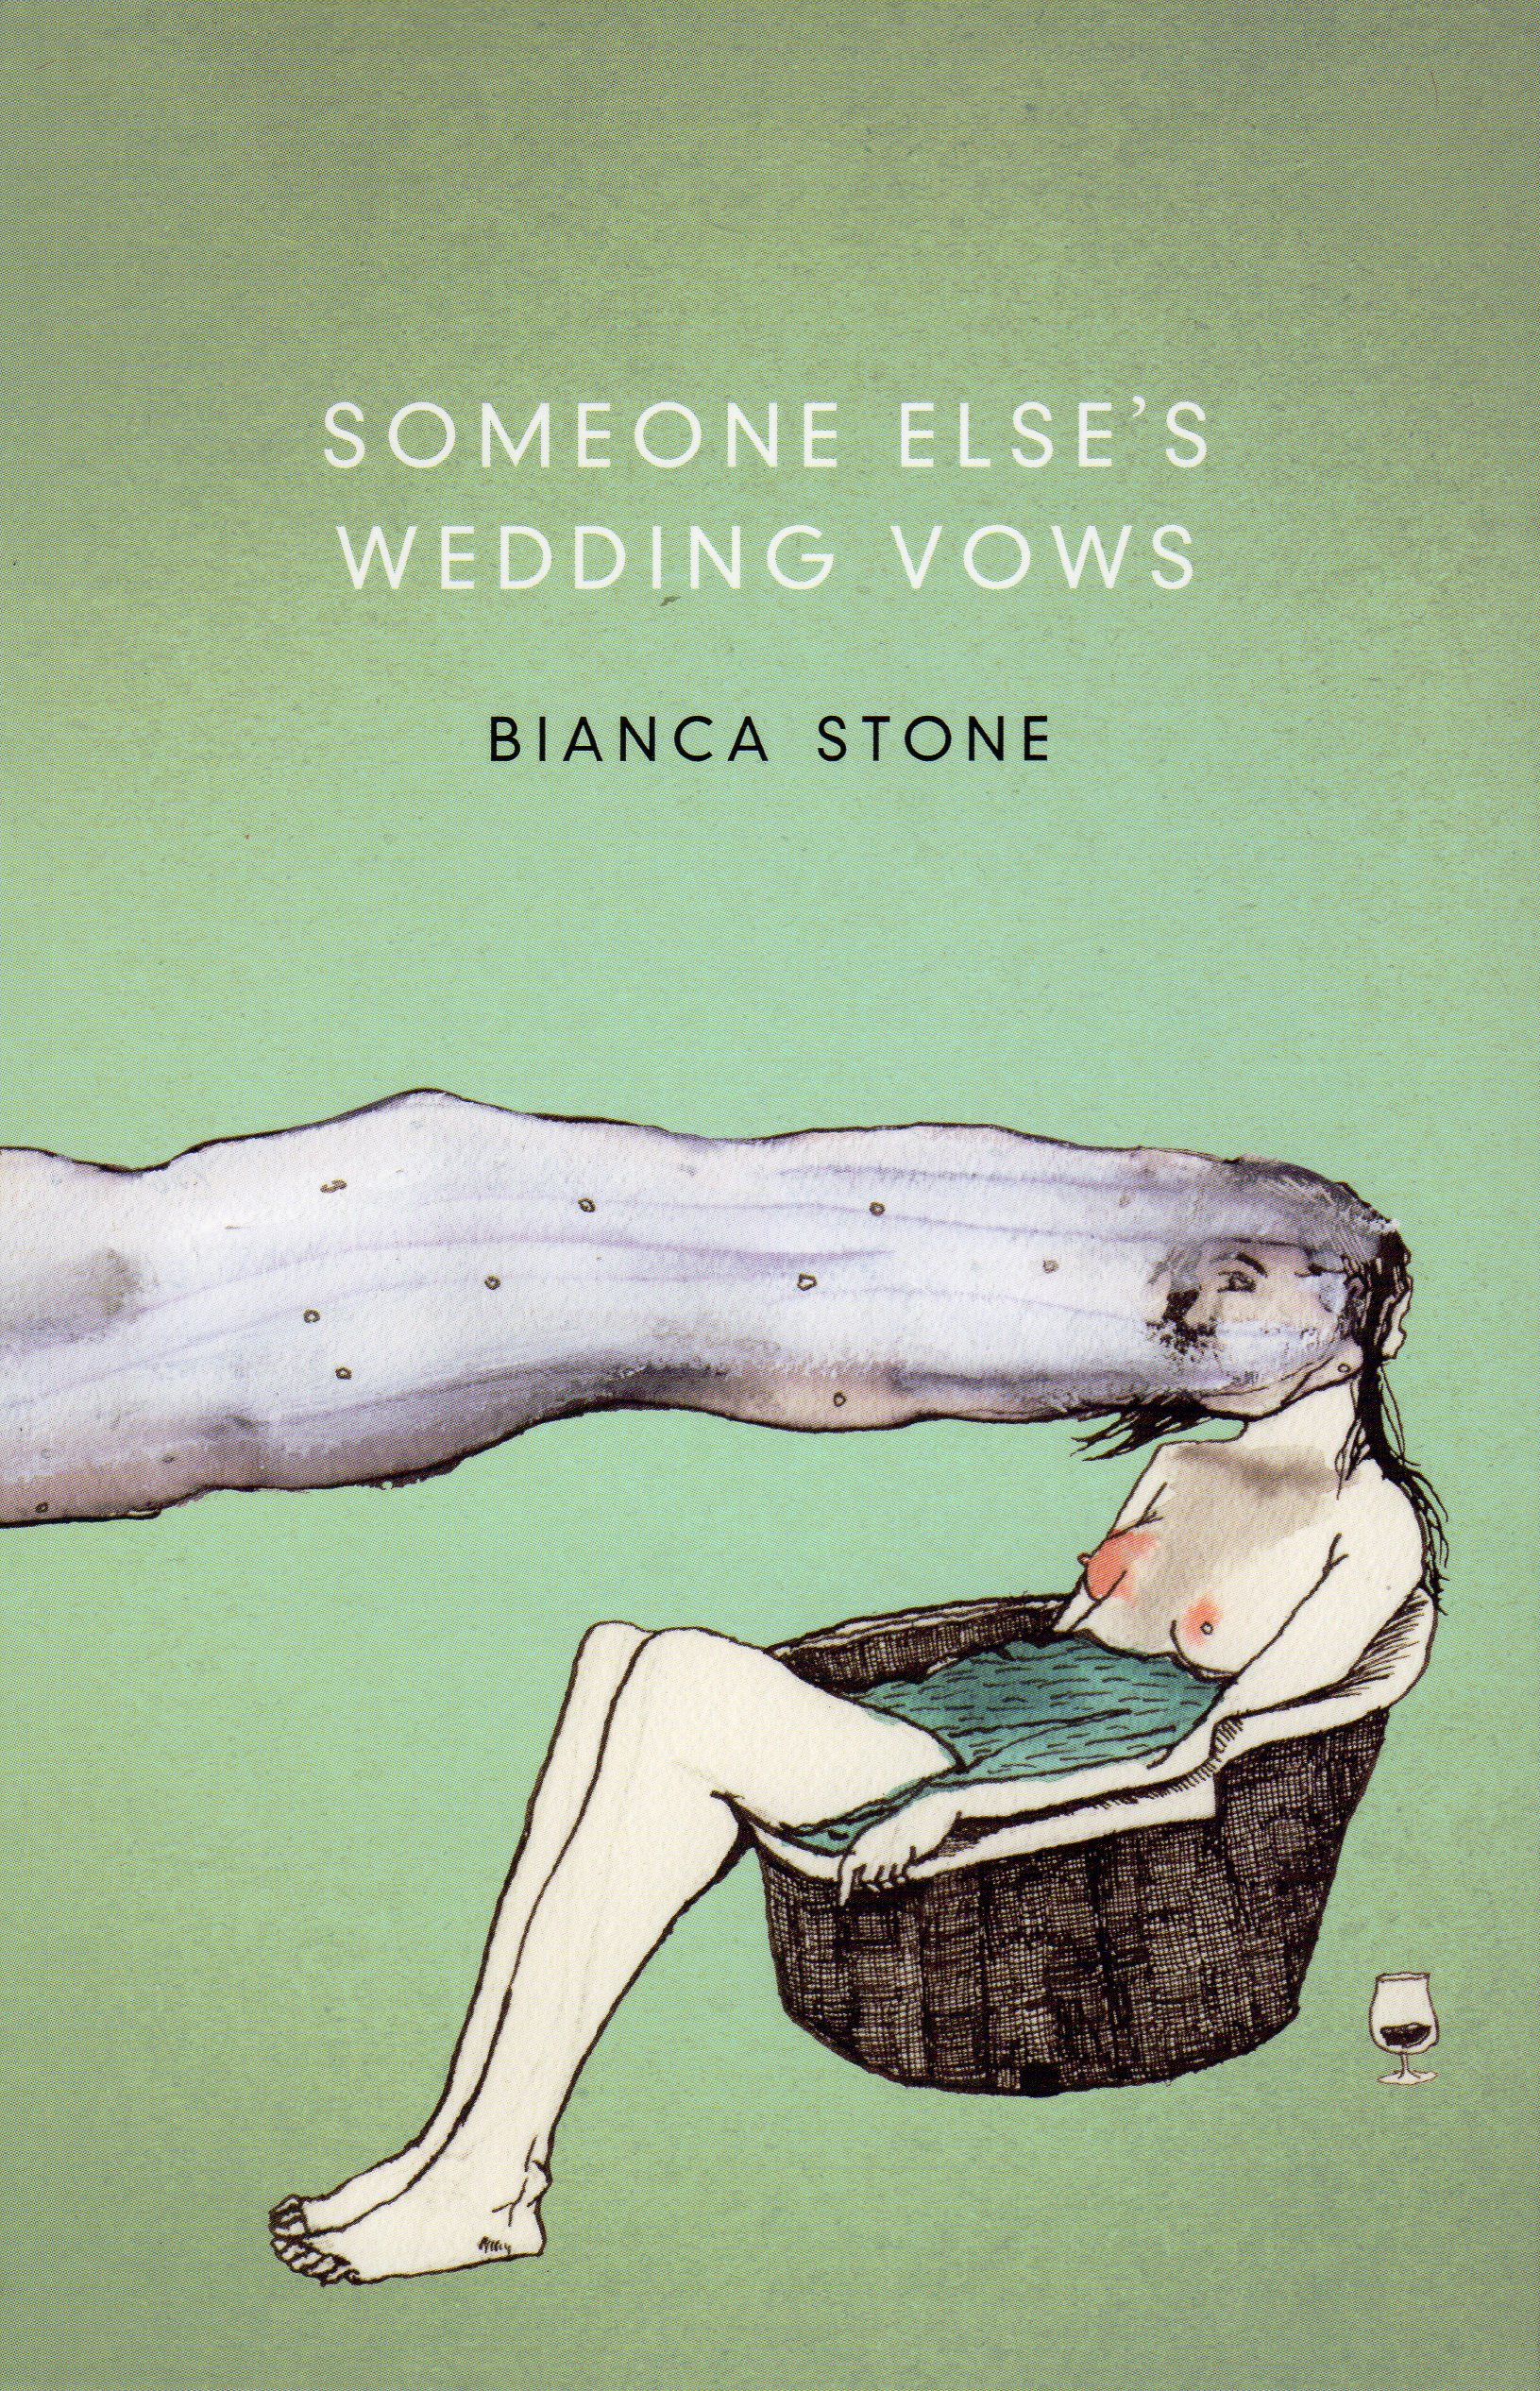 someone-elses-wedding-vows-by-bianca-stone.jpg